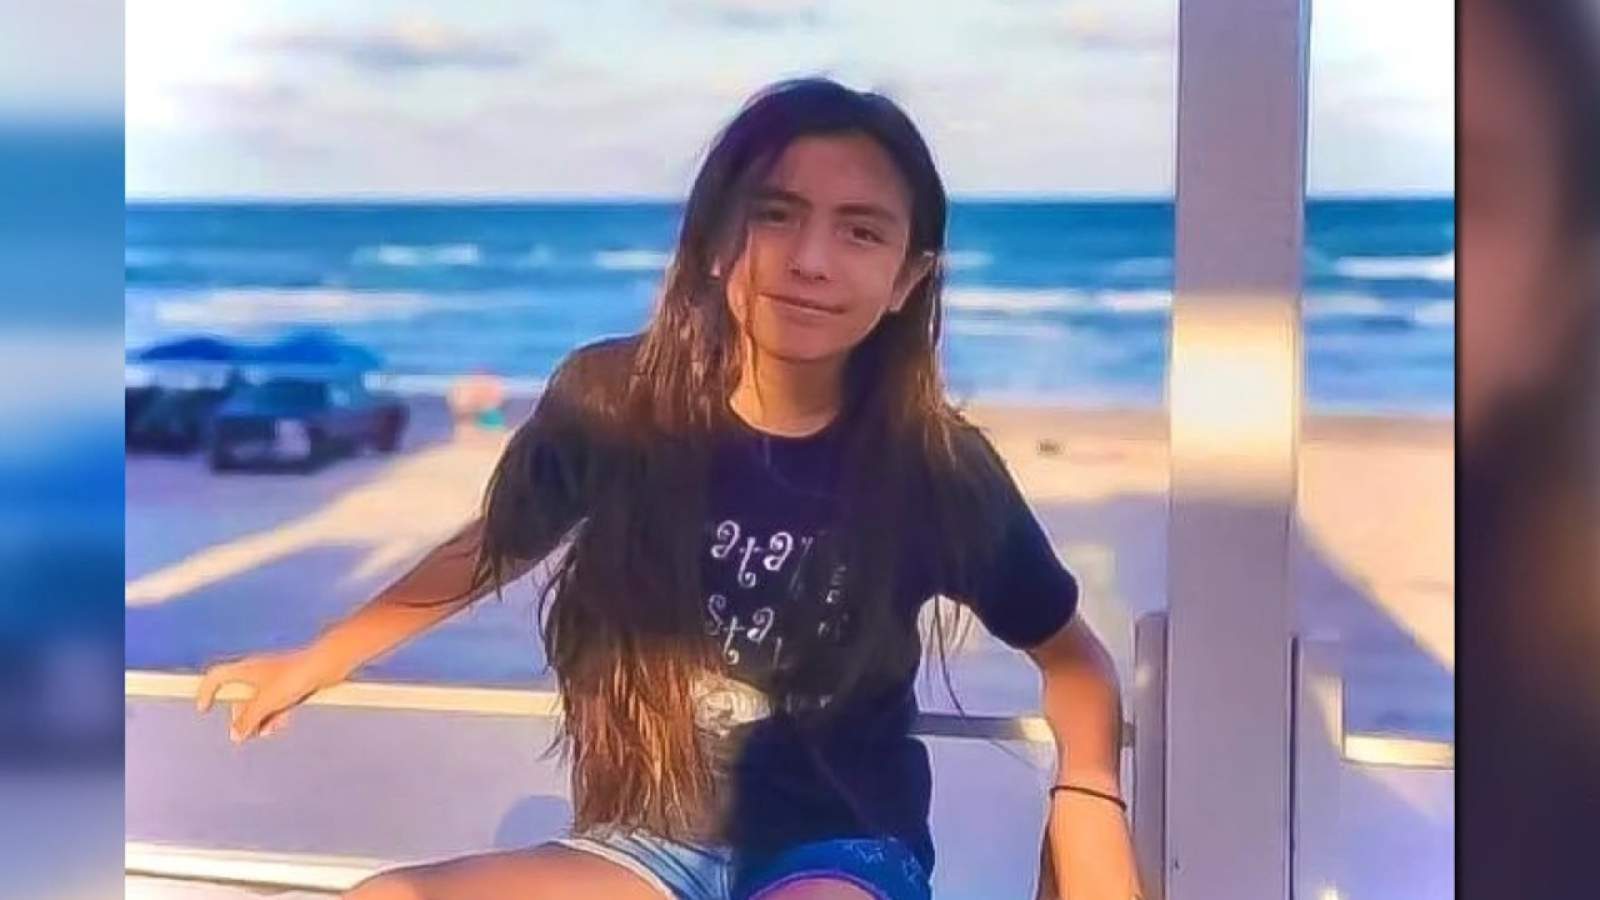 13-year-old Pearsall girl on life support after testing positive for COVID-19, going into cardiac arrest